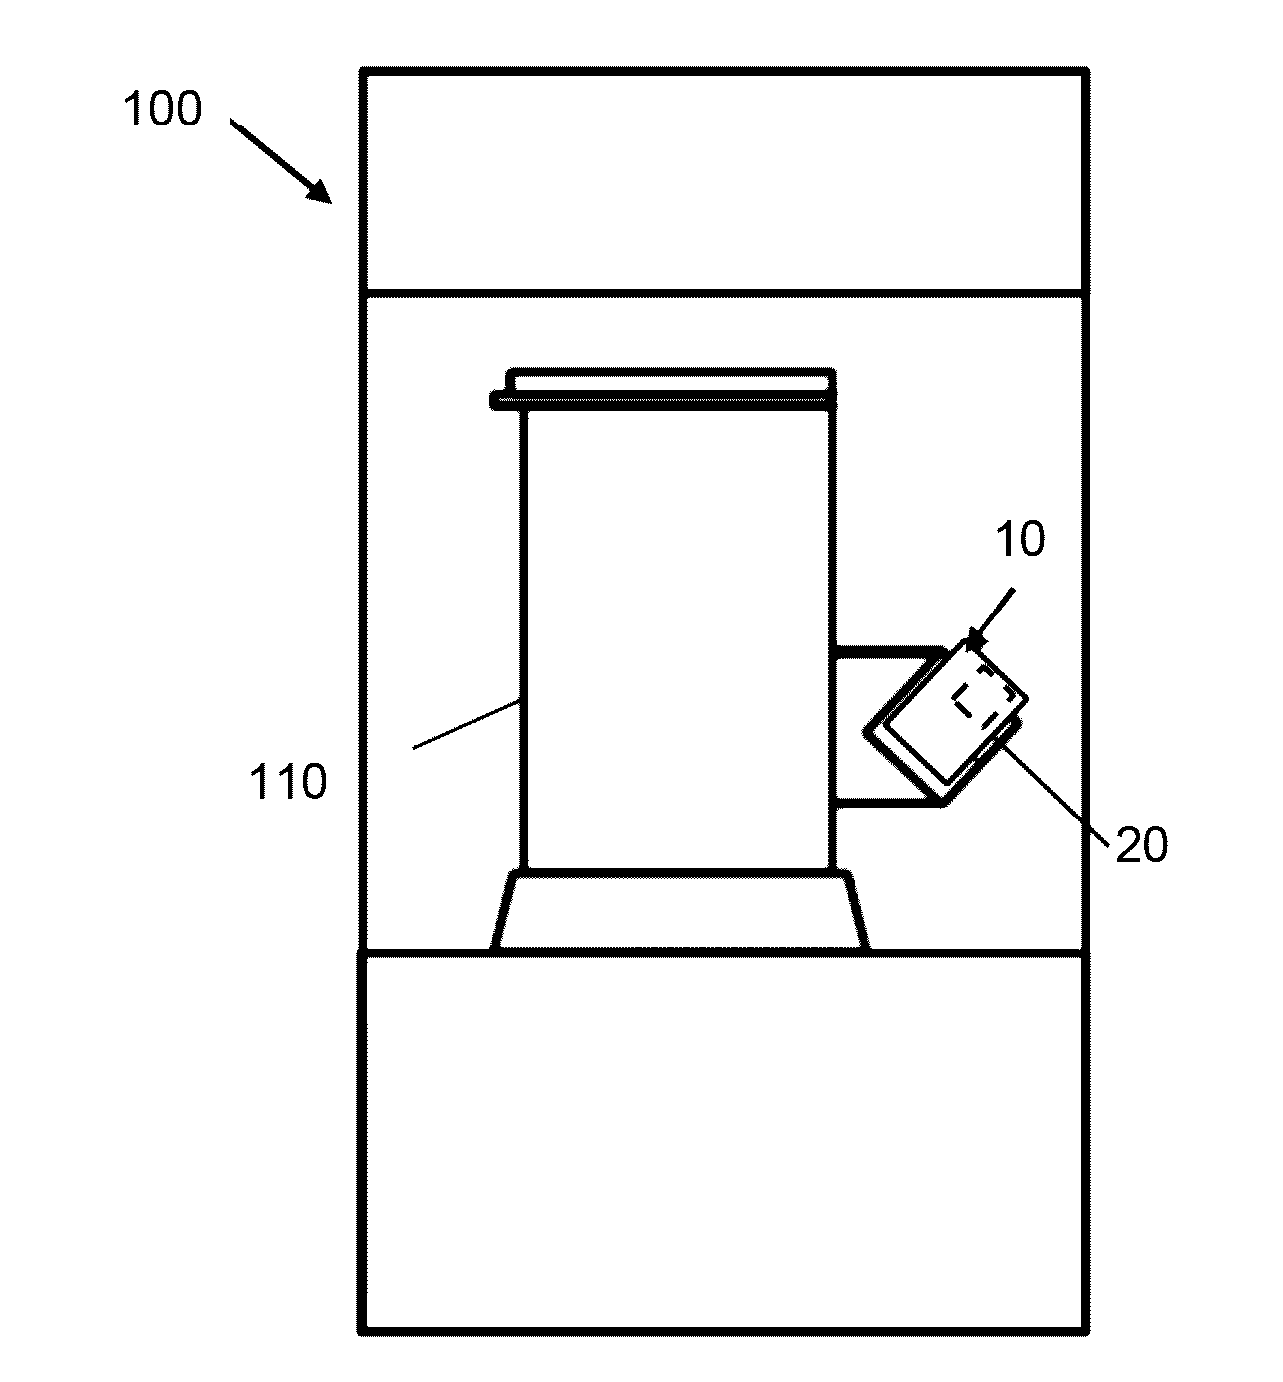 Thermal control device and methods of use